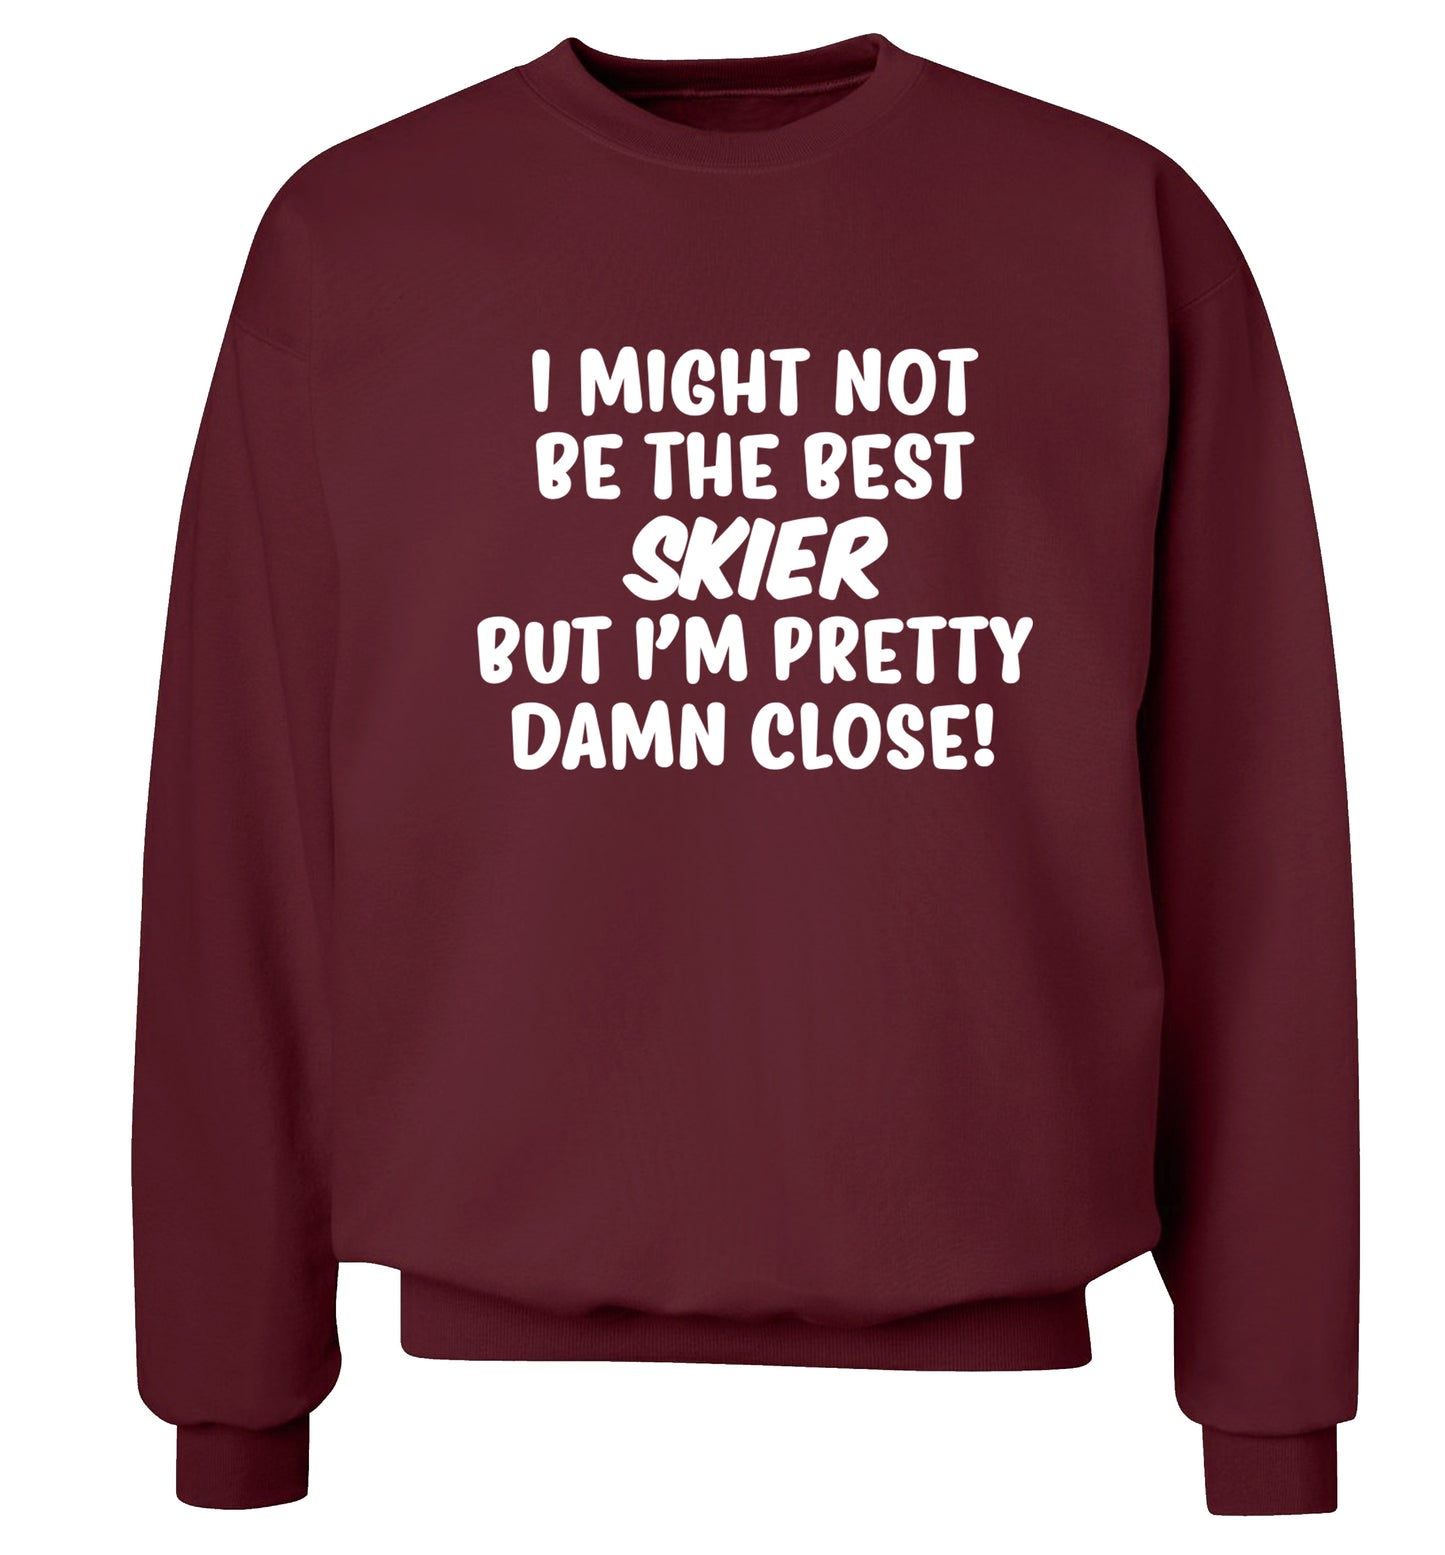 I might not be the best skier but I'm pretty damn close! Adult's unisexmaroon Sweater 2XL